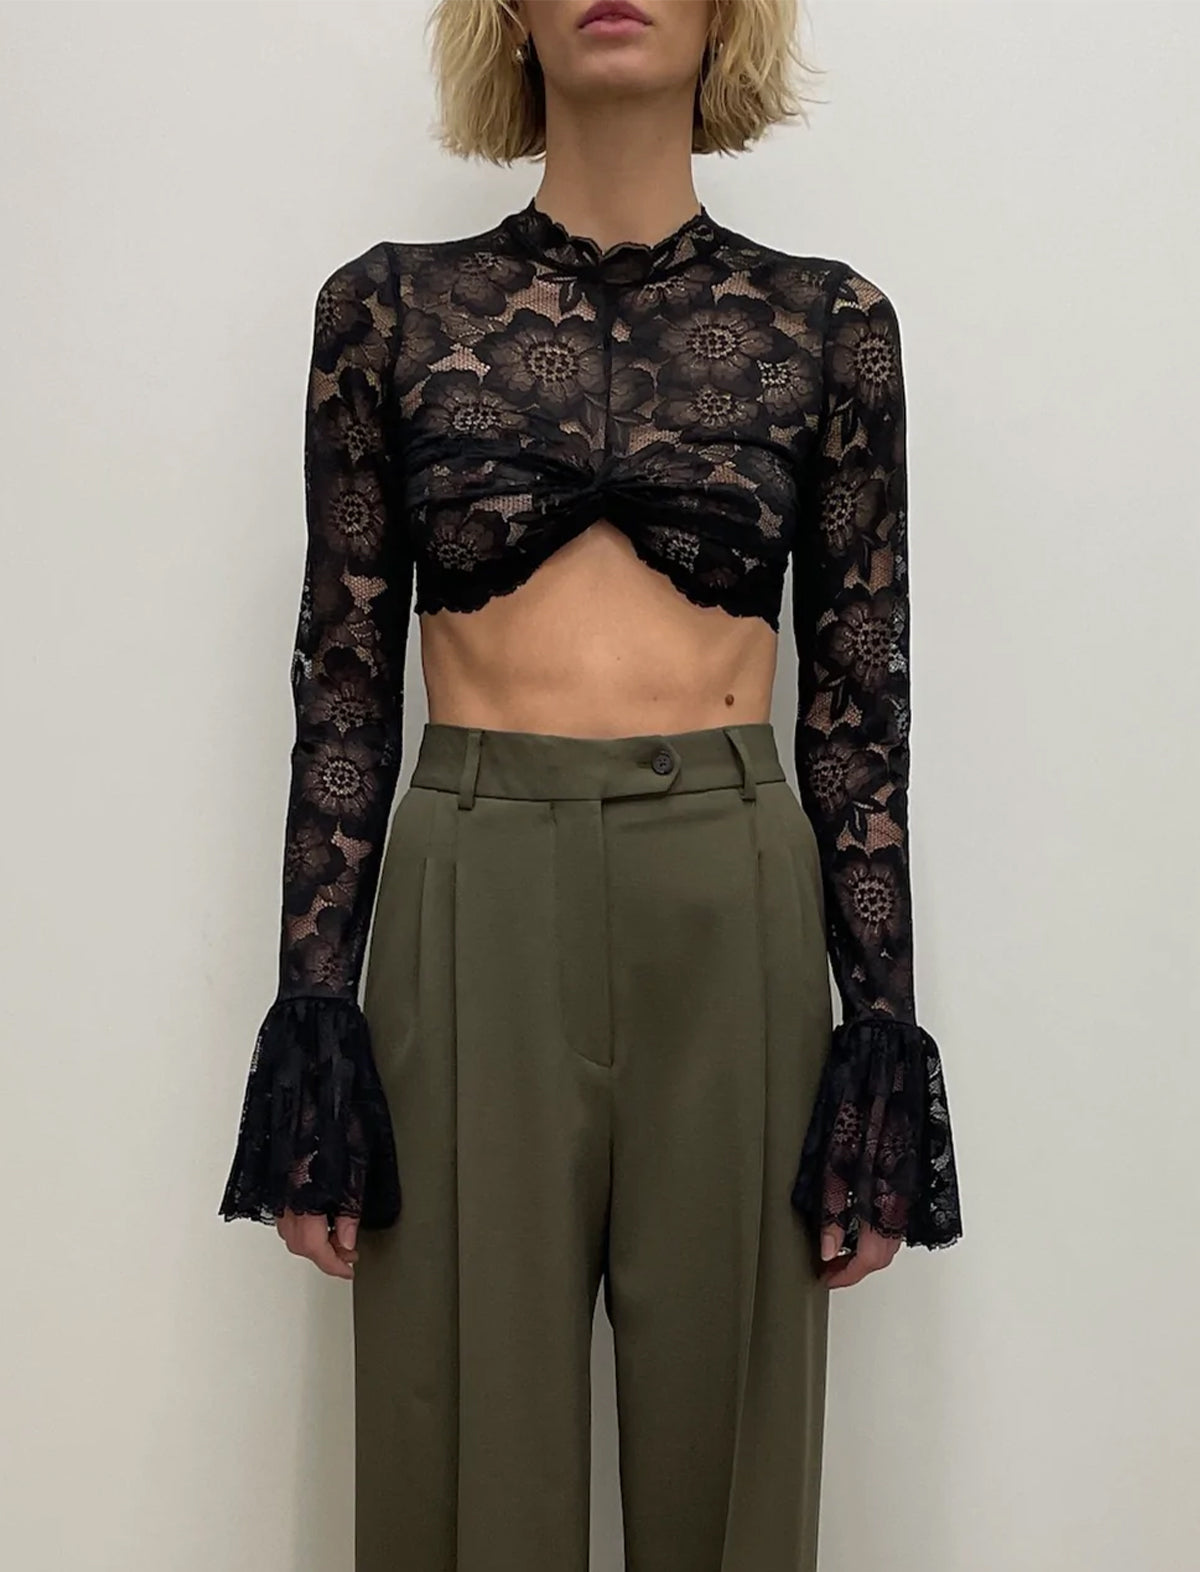 BEAUFILLE Frida Floral Lace Blouse in Black